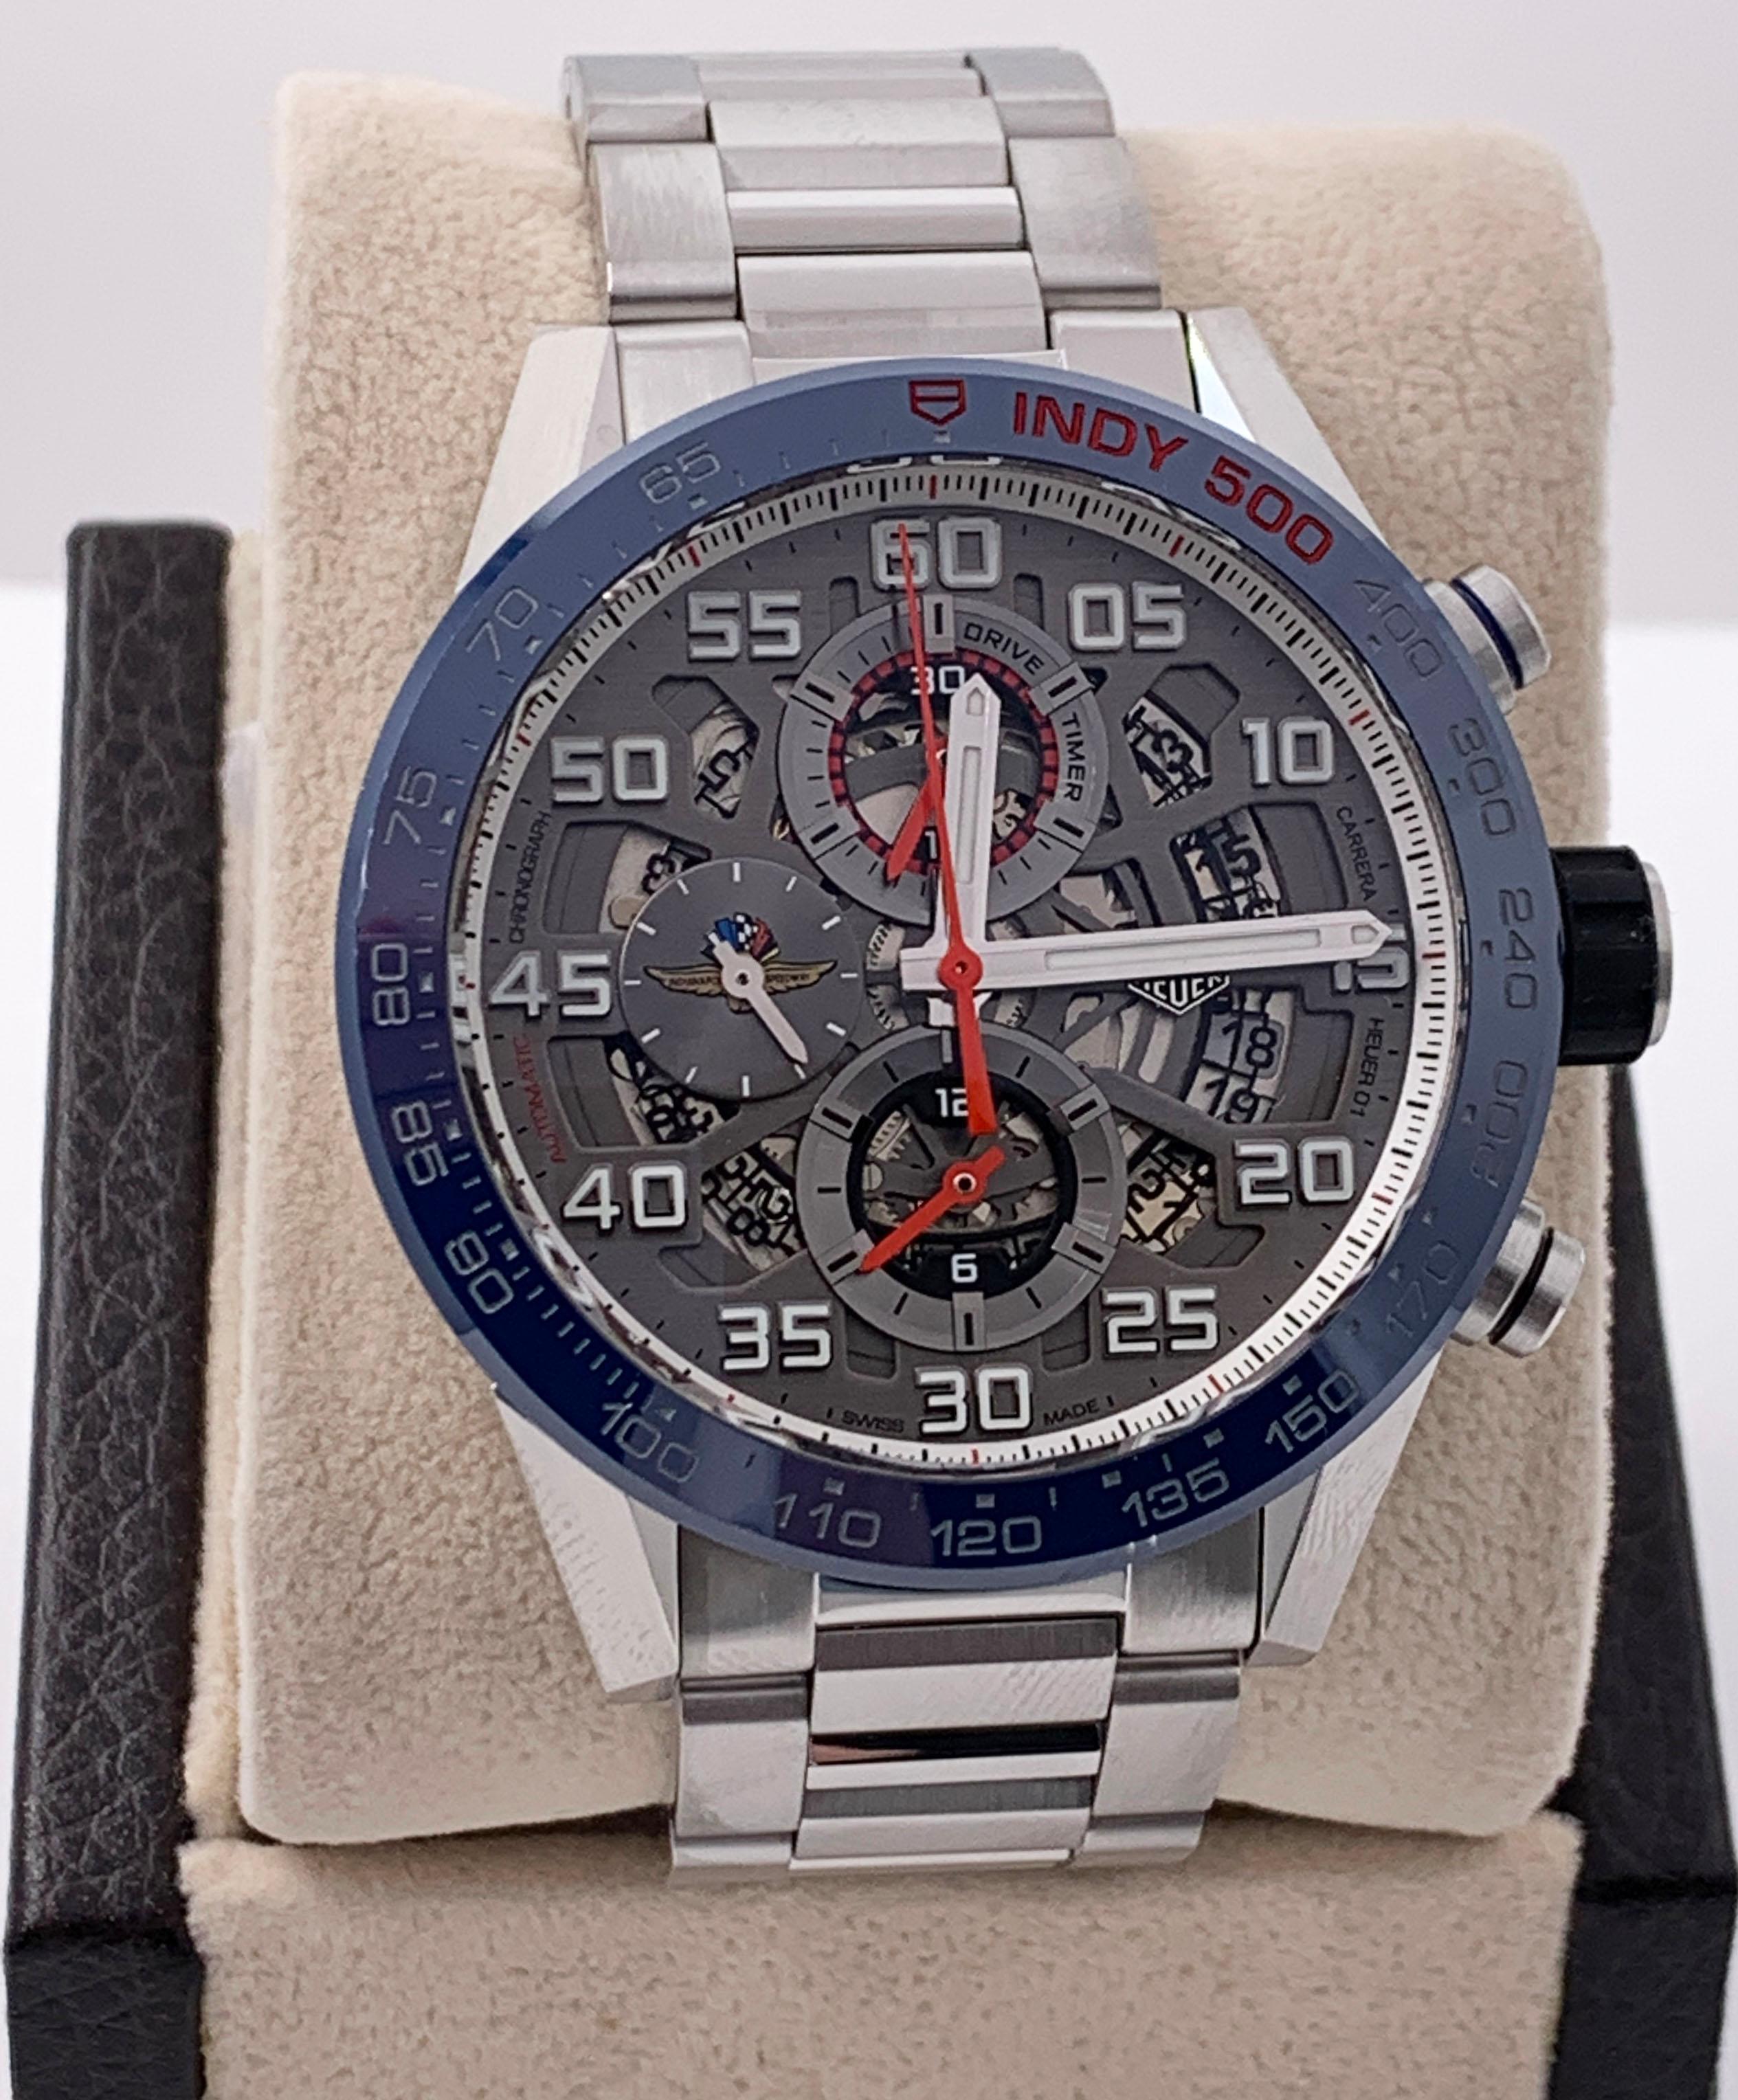 Style Number: CAR201G

 

Year: 2020

 

Model: Carrera Skeleton Indy 500

 

Case Material: Stainless Steel 

 

Band: Stainless Steel 

 

Bezel:  Blue Ceramic 

 

Dial: Skeleton 

 

Face: Sapphire Crystal 

 

Case Size: 43mm

 

Includes: